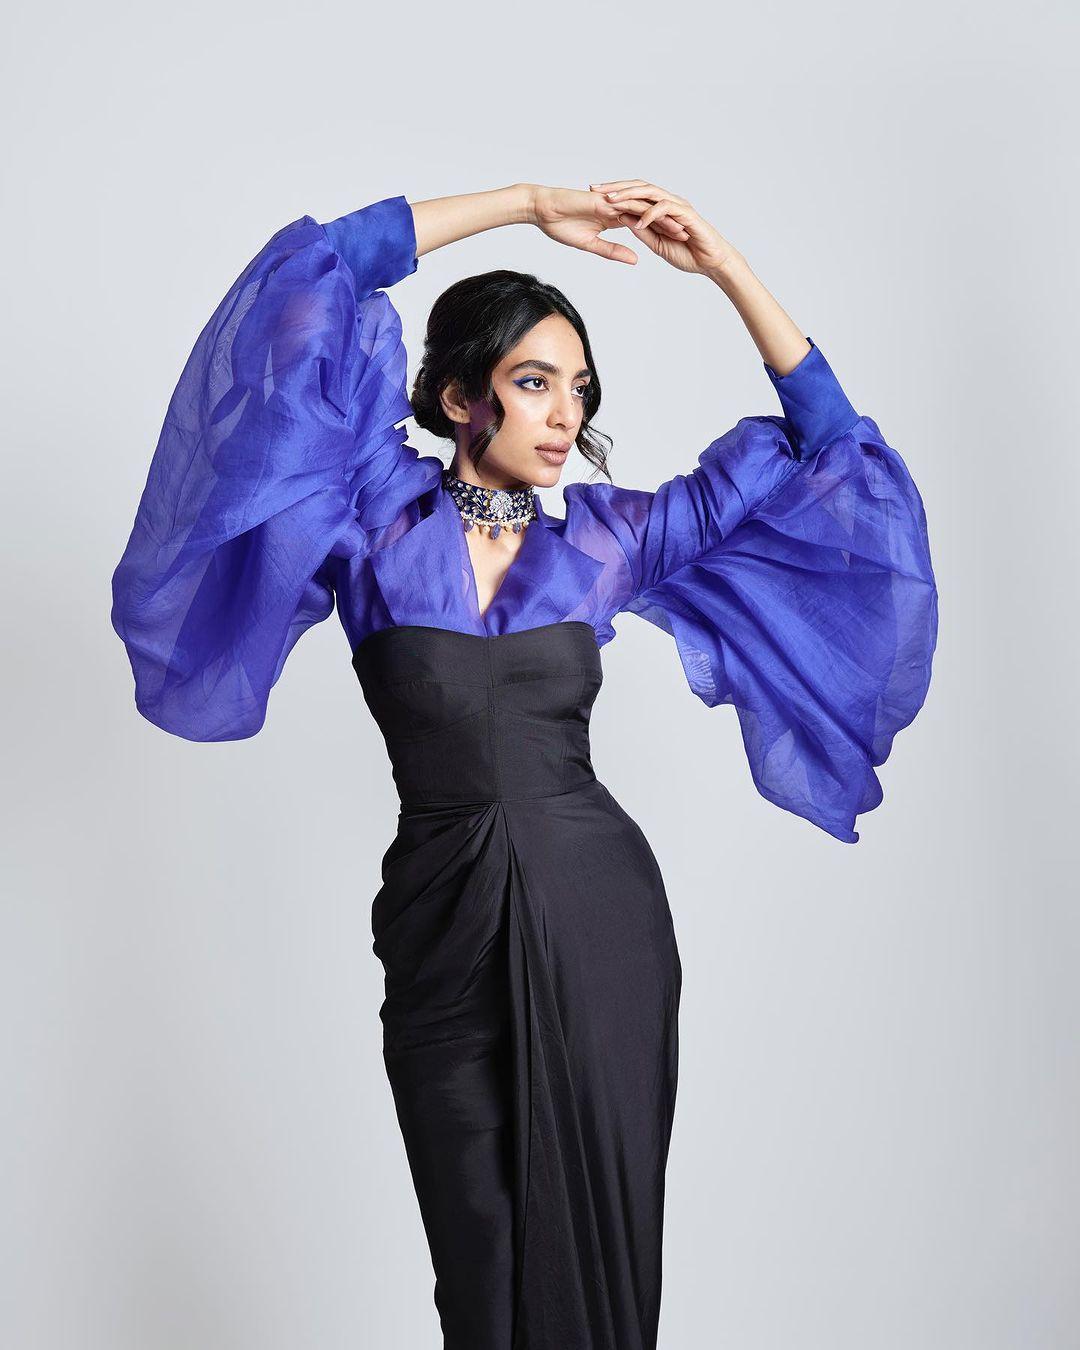 Her ensemble was elevated with a vibrant blue under-shirt featuring graceful outfly sleeves that added a touch of flair